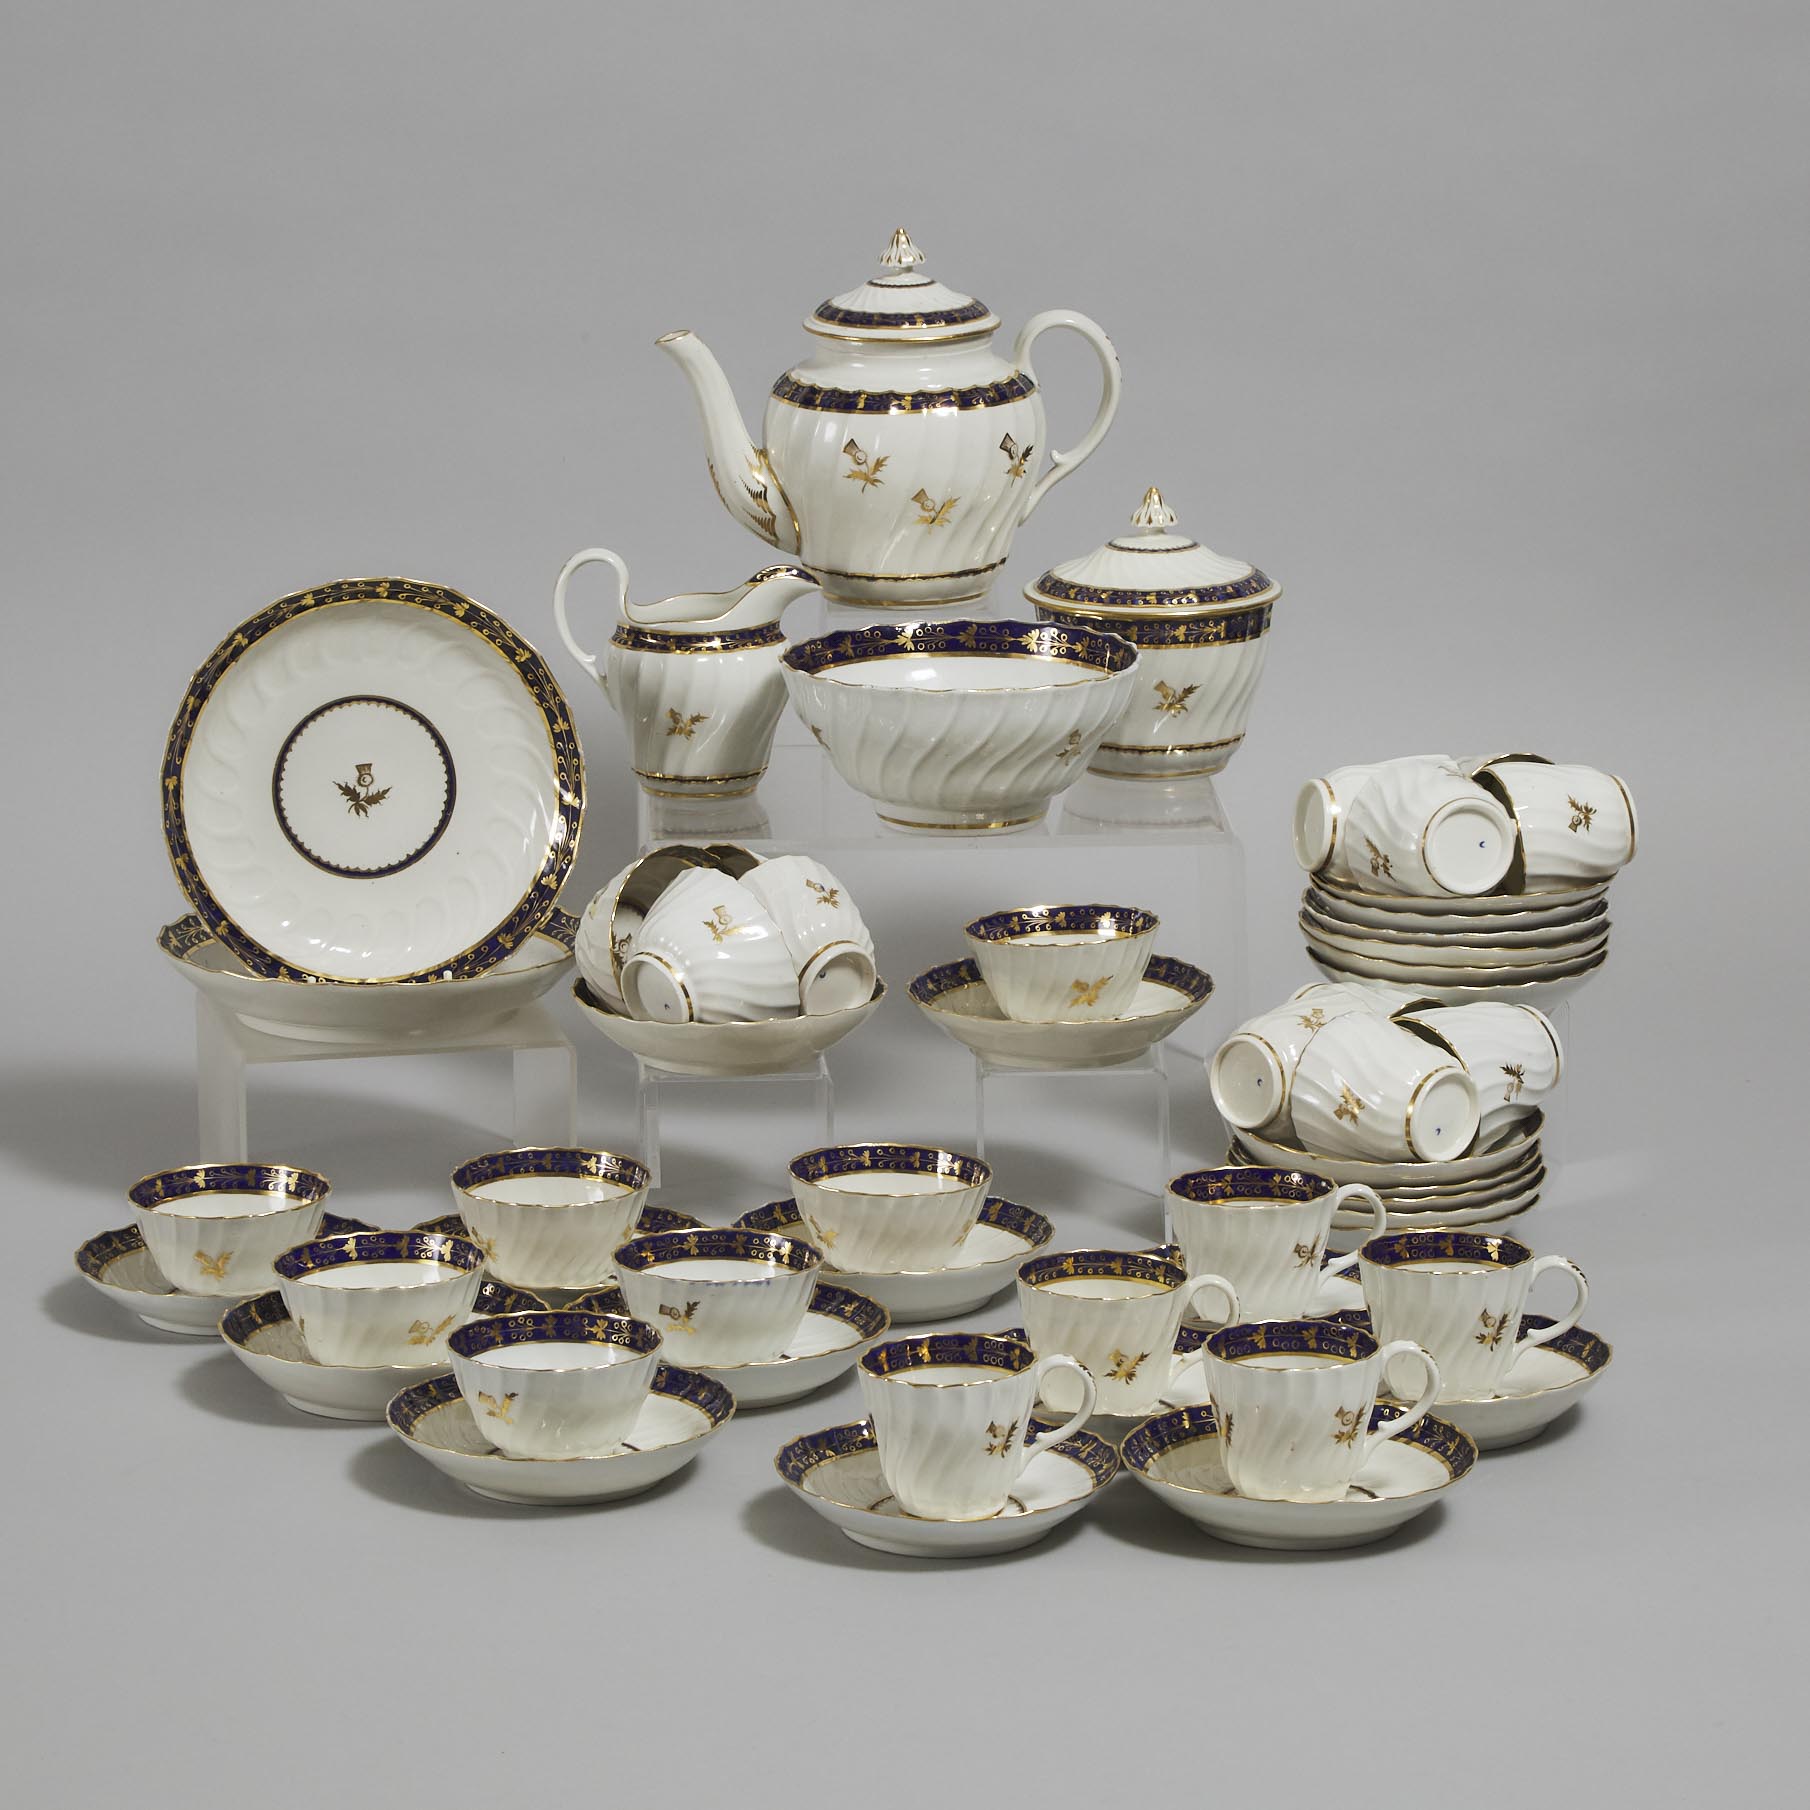 Flight and Barr Worcester Blue and Gilt Decorated Fluted Tea Service, c.1790-1800